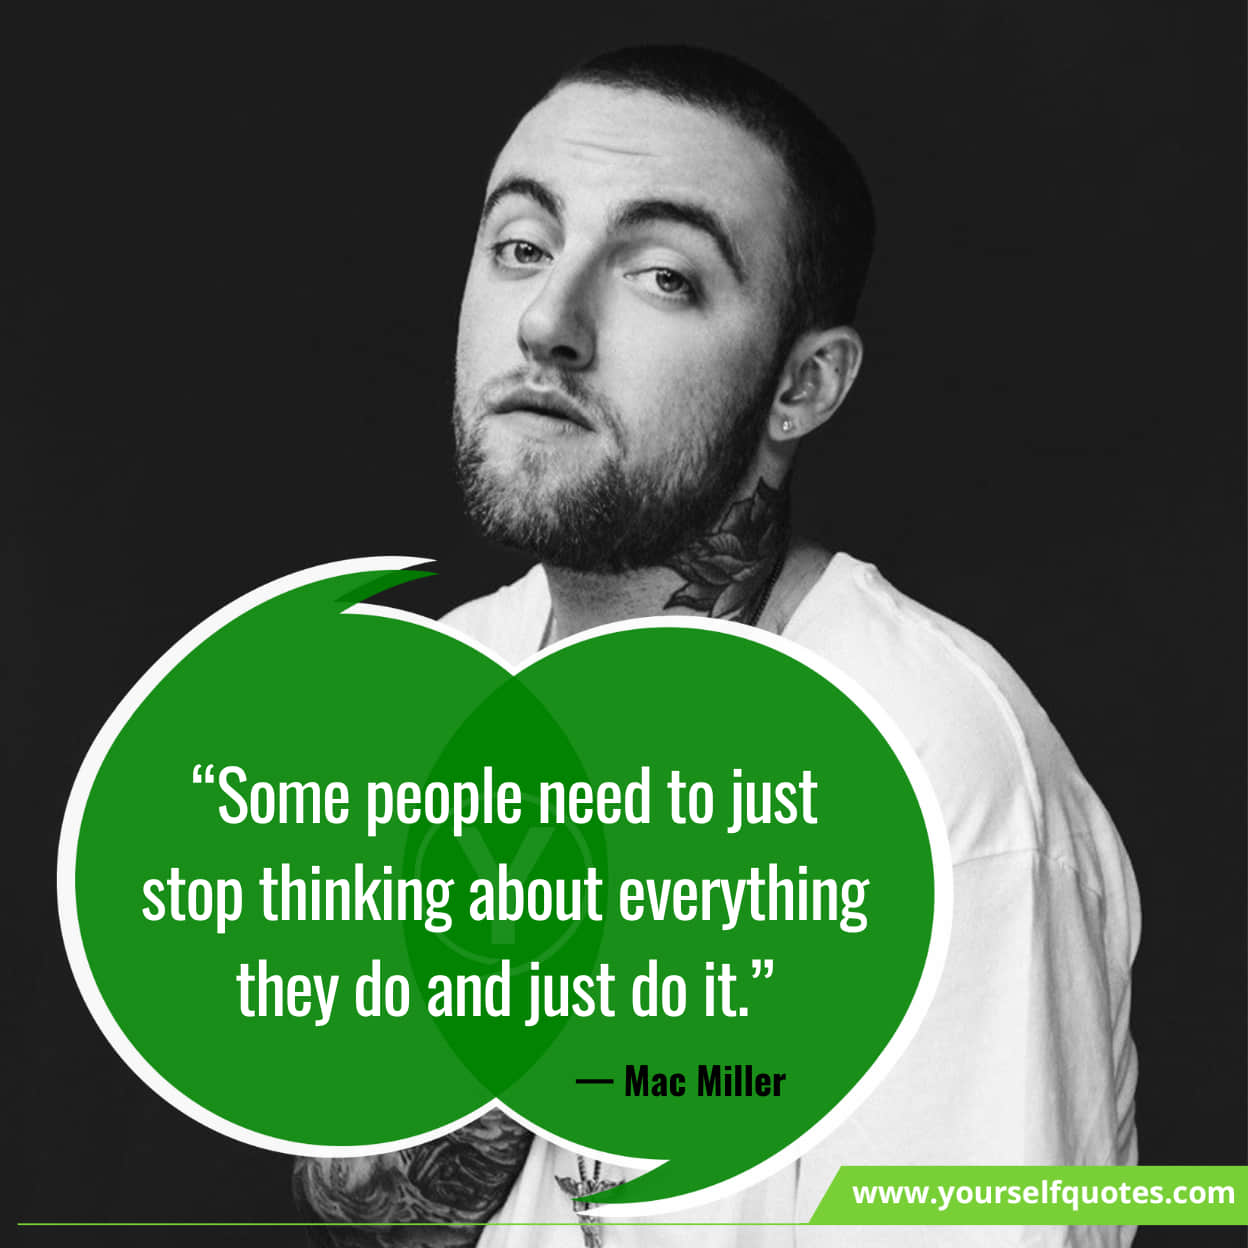 Mac Miller Quotes For Life